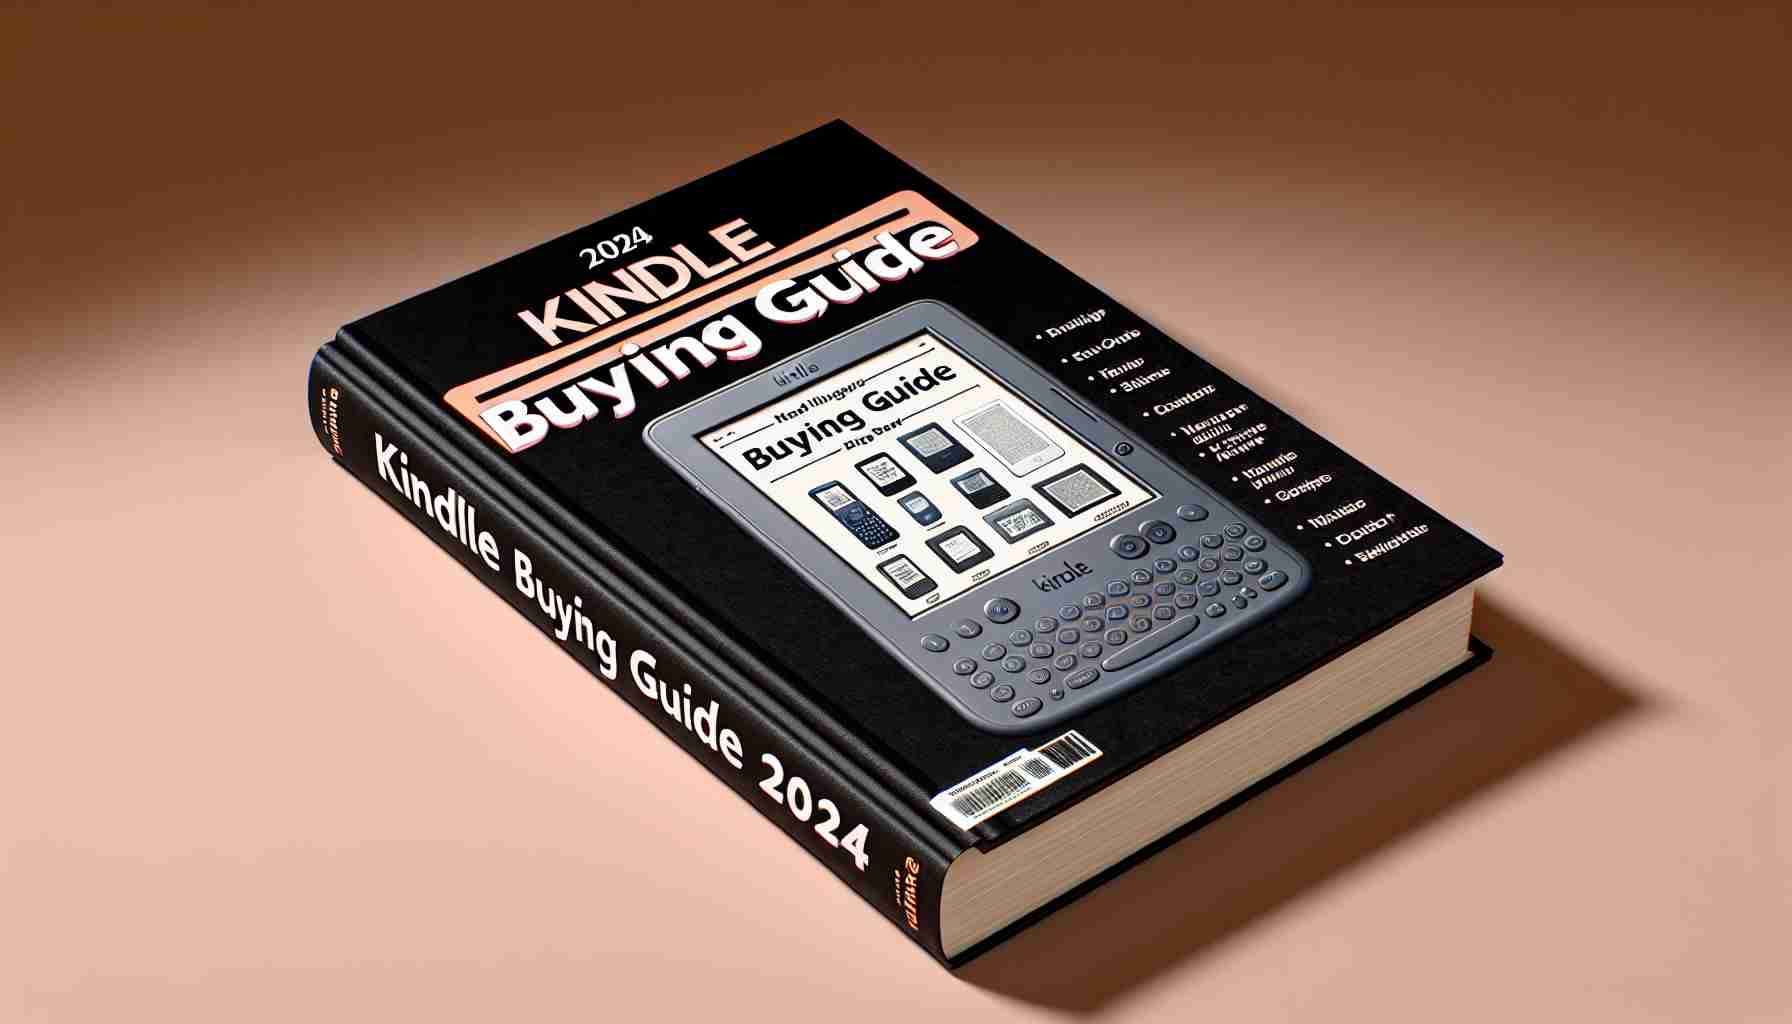 Kindle Buying Guide 2024